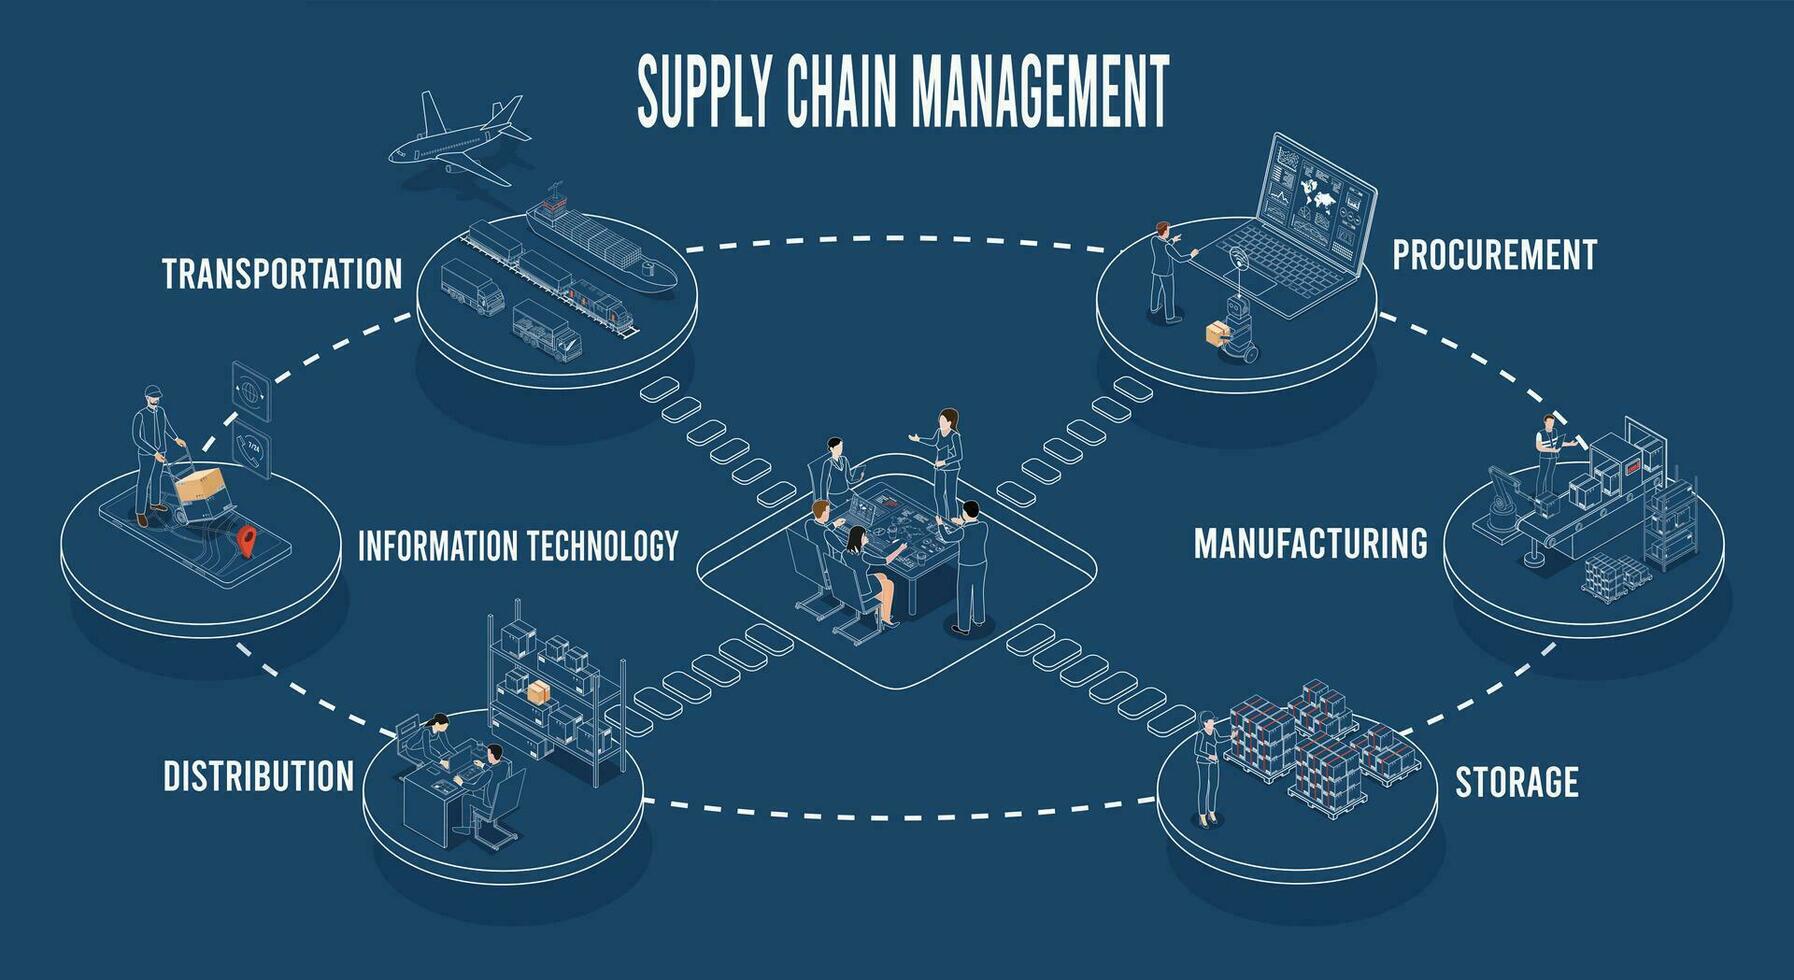 ict leaders in supply chain management